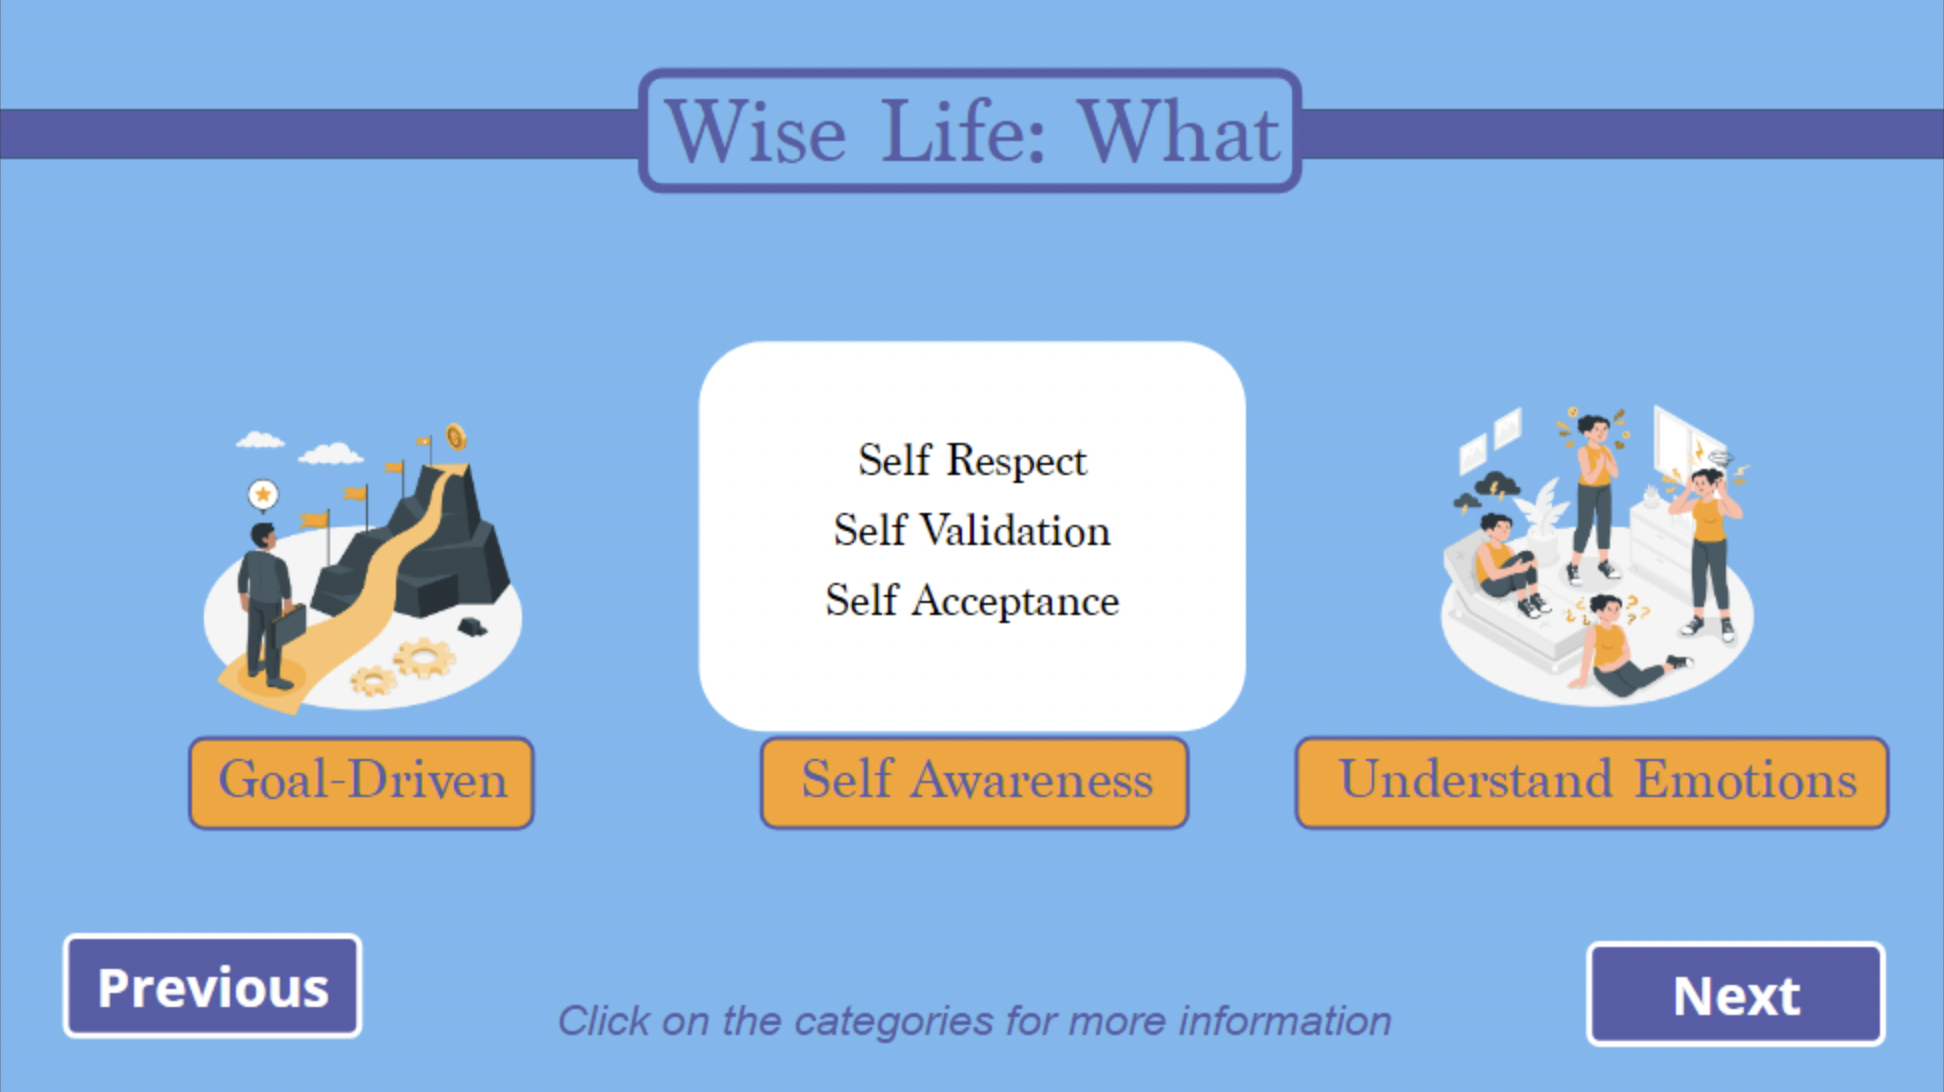 Wise Life: What